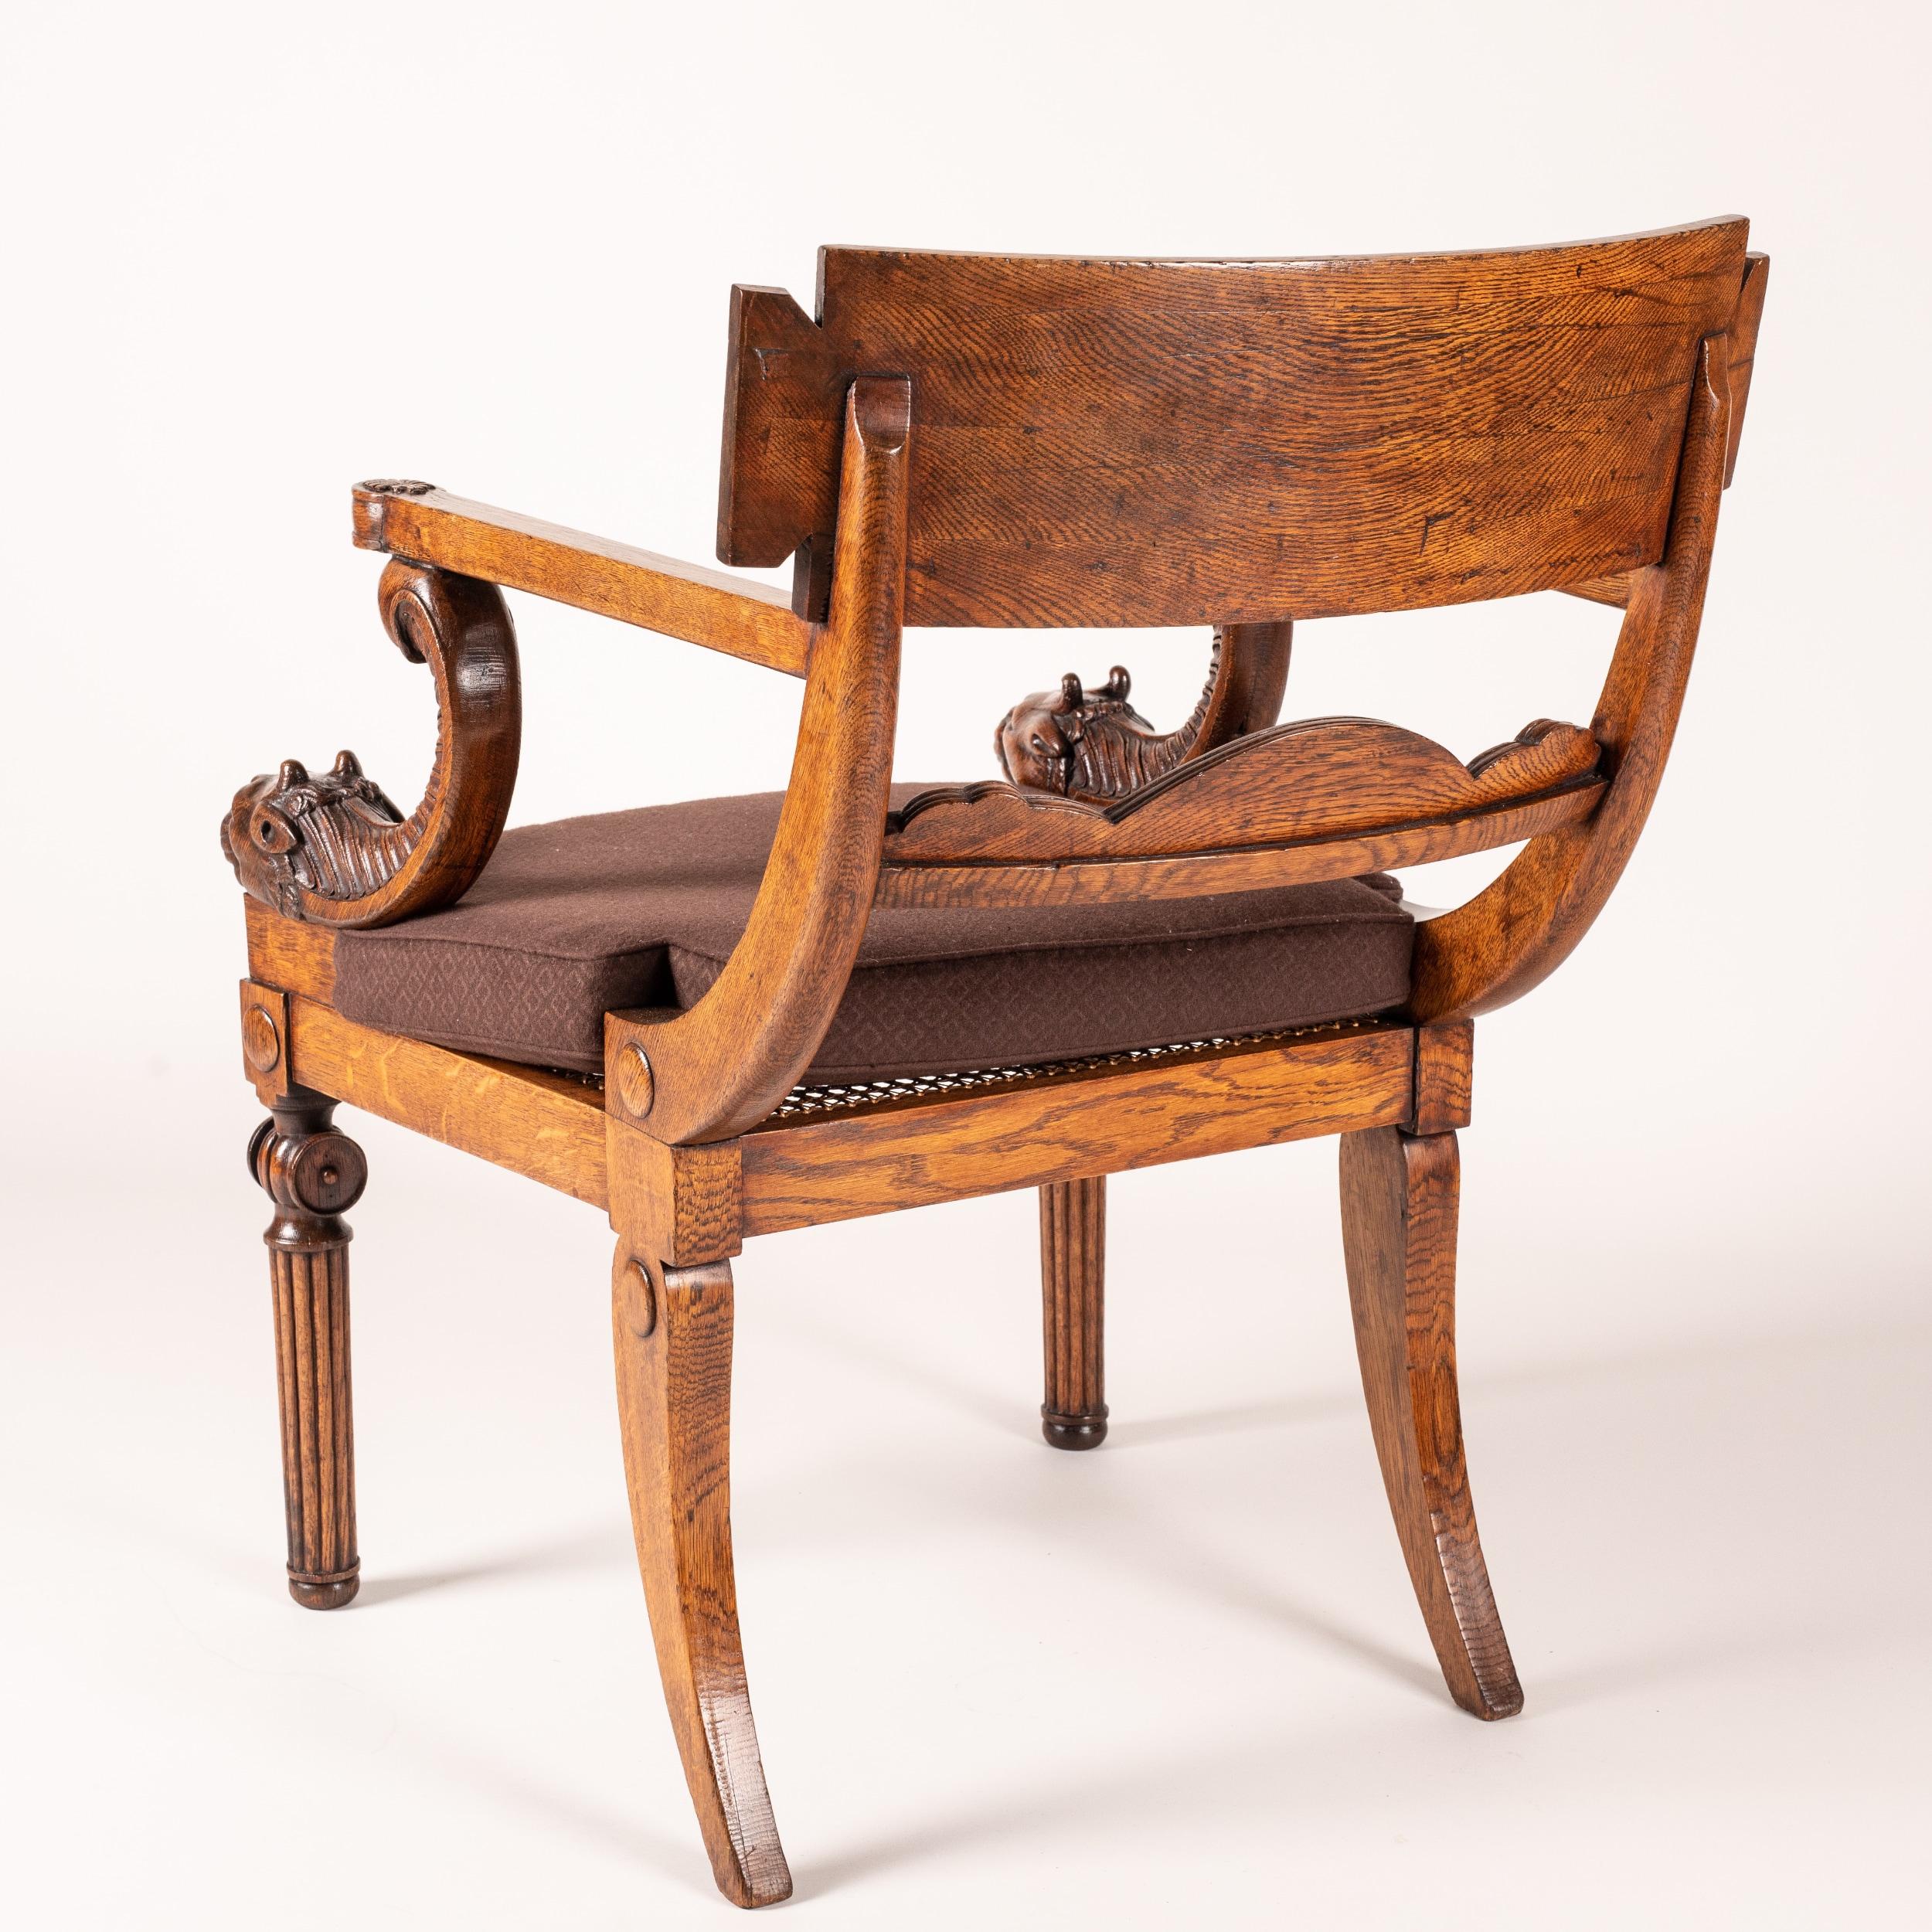 A Regency Period Klismos armchair
In the manner of Thomas Hope

Carved from oak, with the typical Klismos construction having sabre back legs, the tapering front legs turned and reeded with baluster capitals; the swooping and curved studded